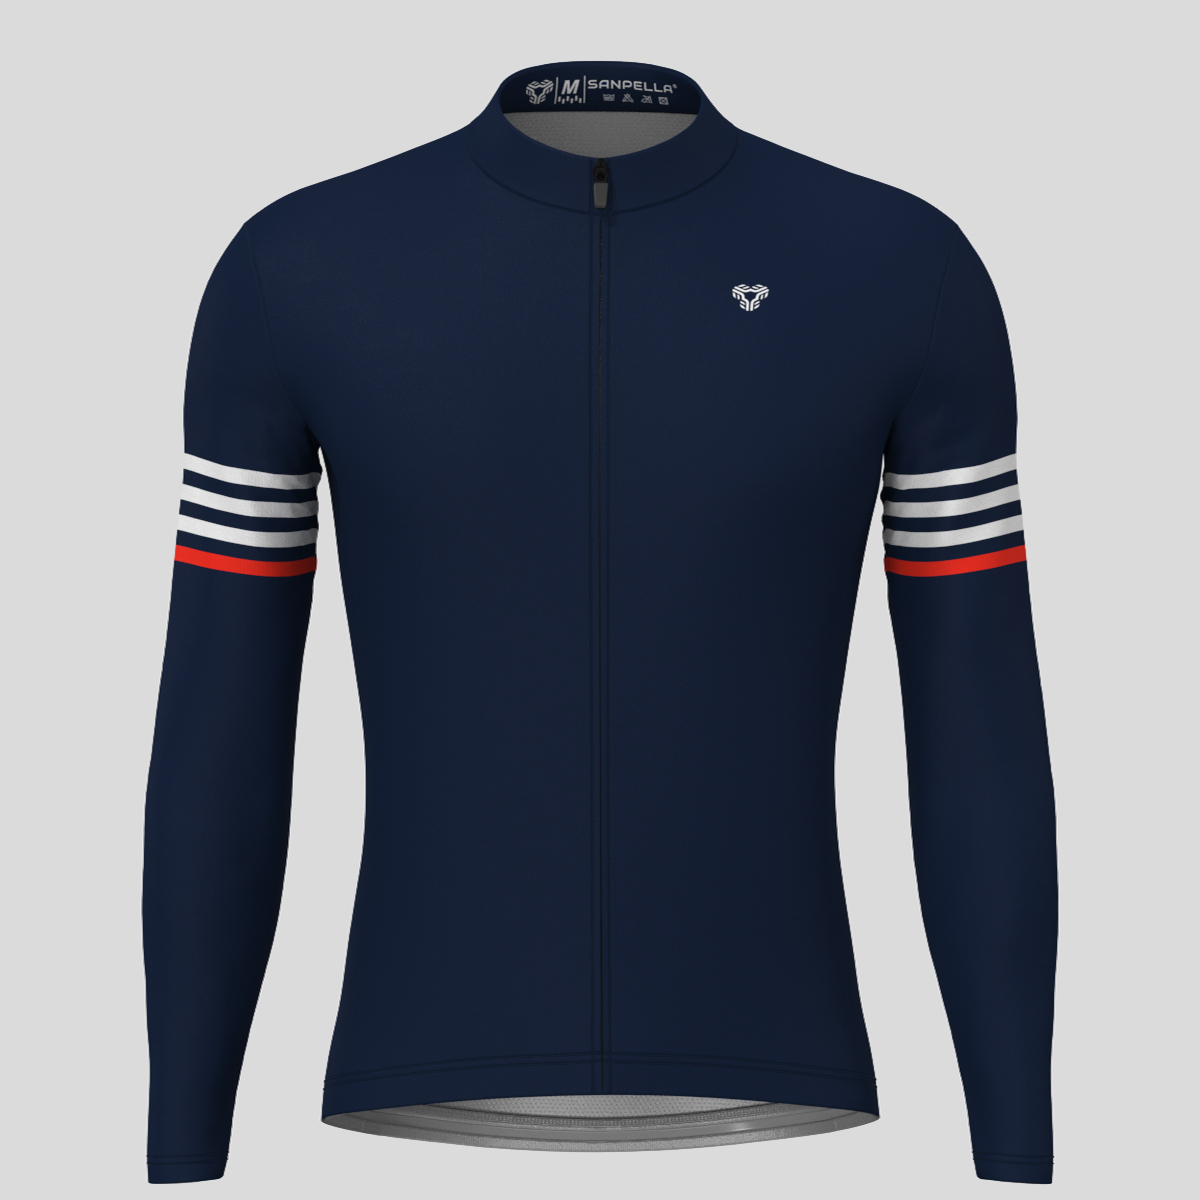 Minimal Stripes Men's LS Cycling Jersey - Navy/White/Red